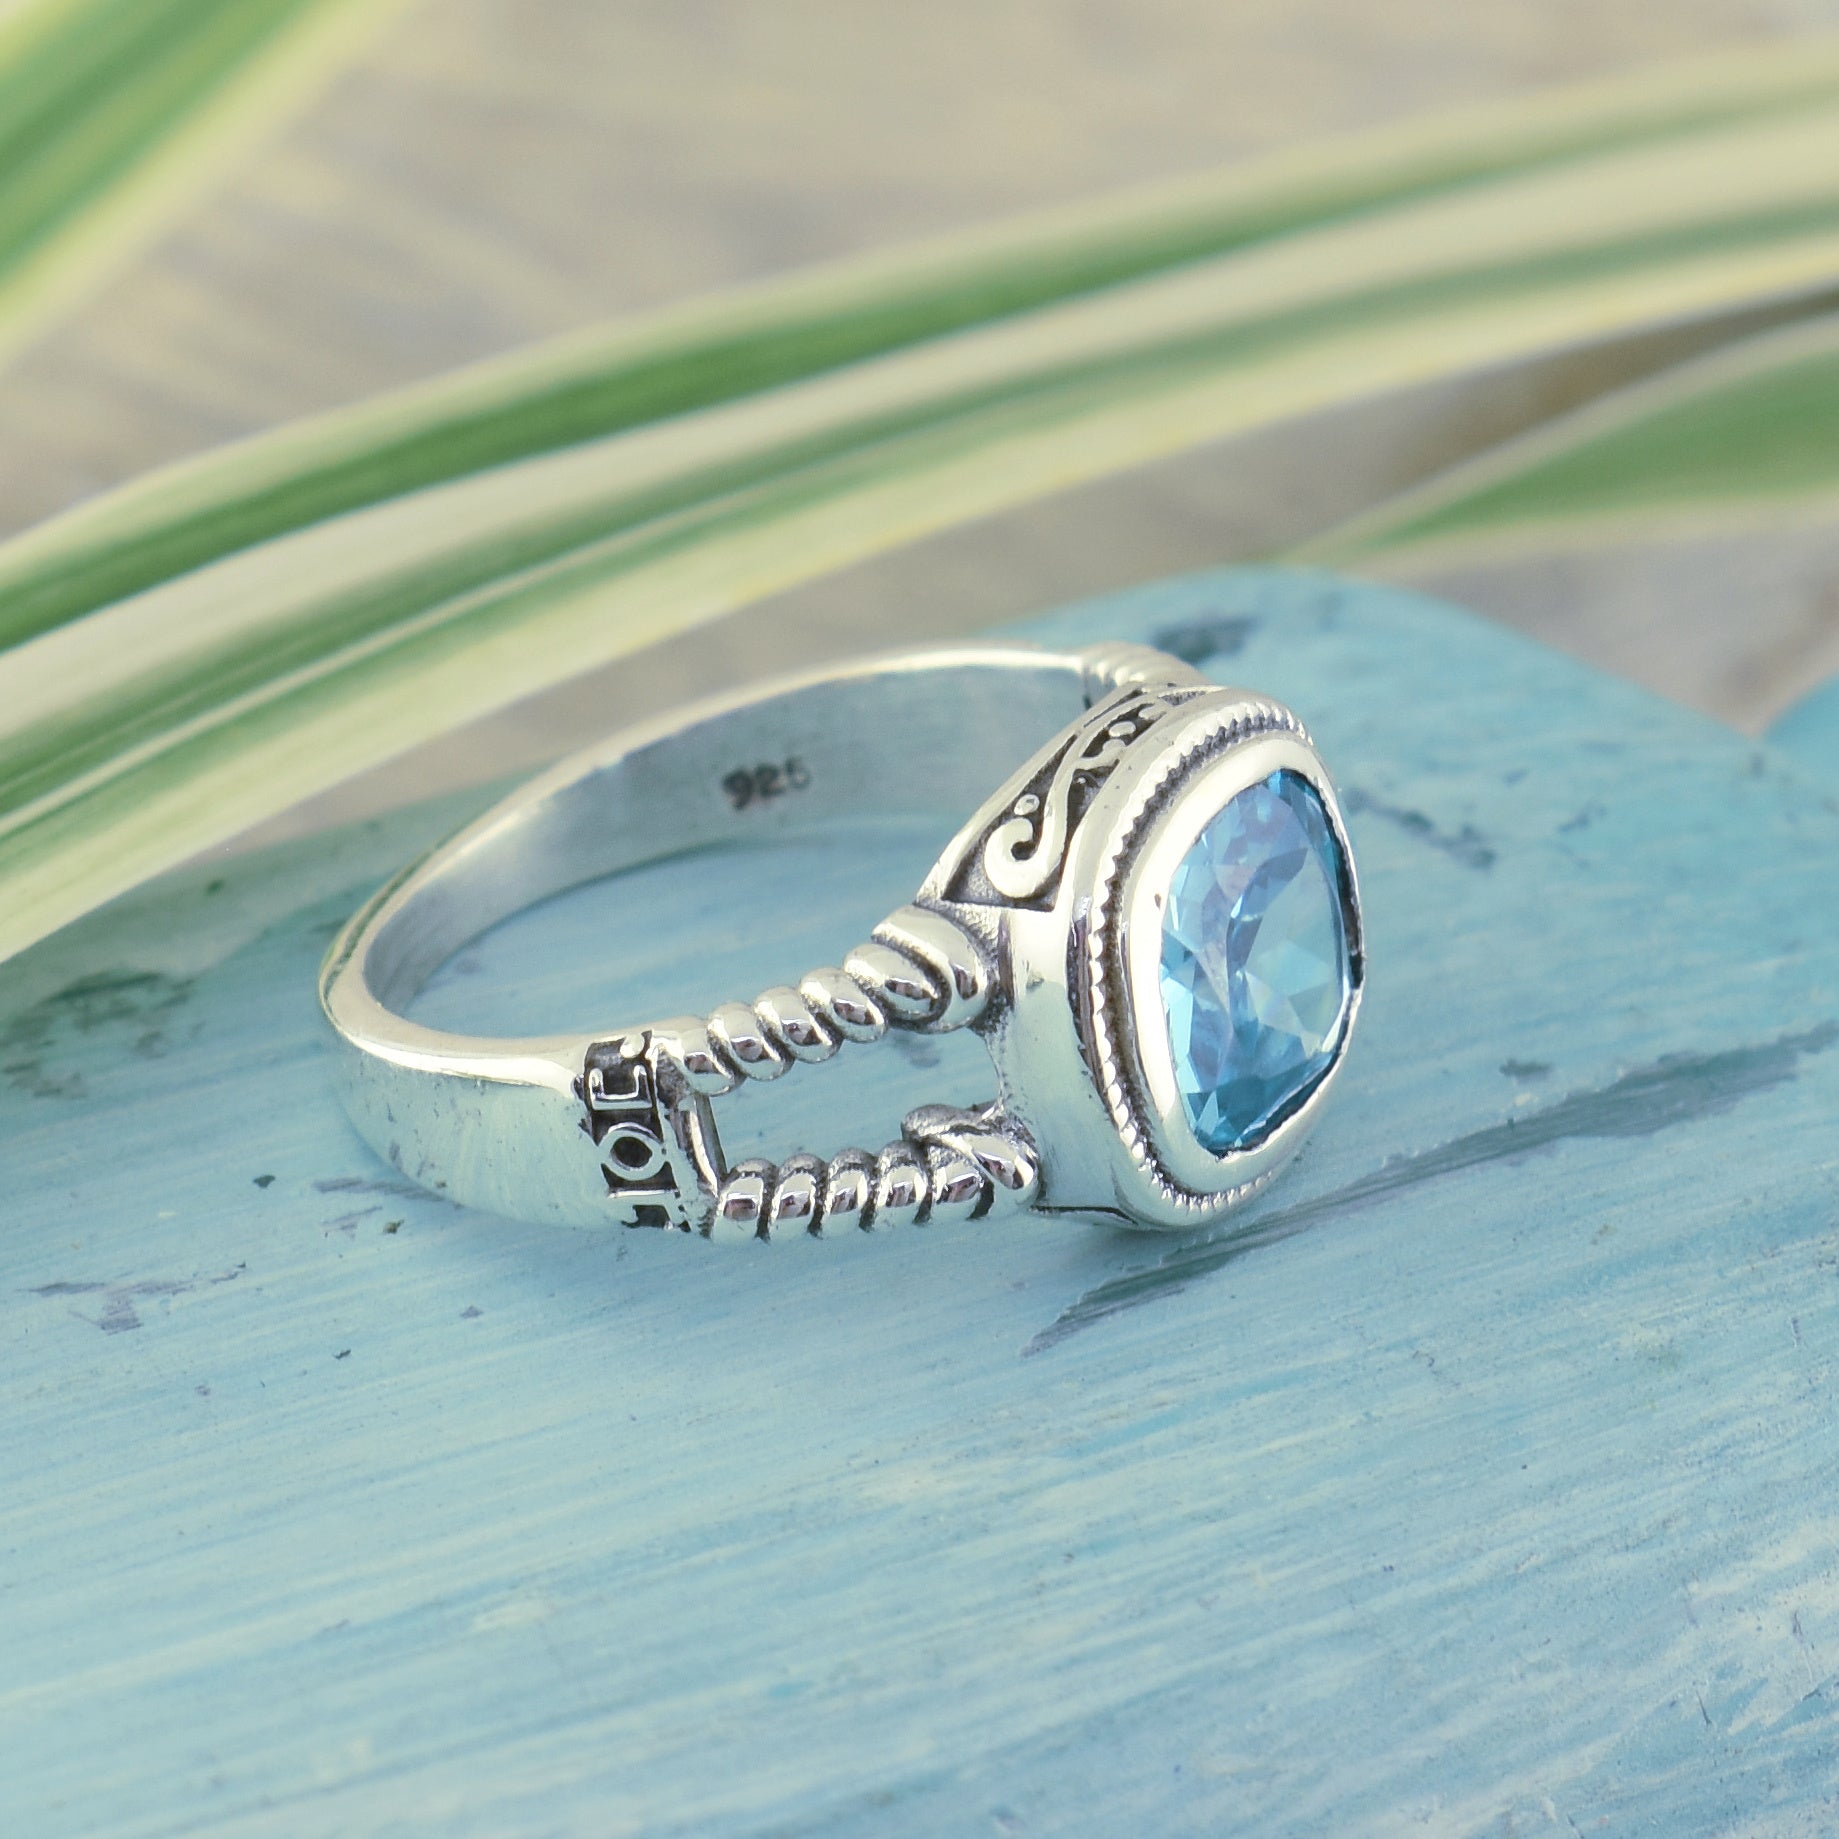 sterling silver ring with filigree and rope design and a blue topaz stone